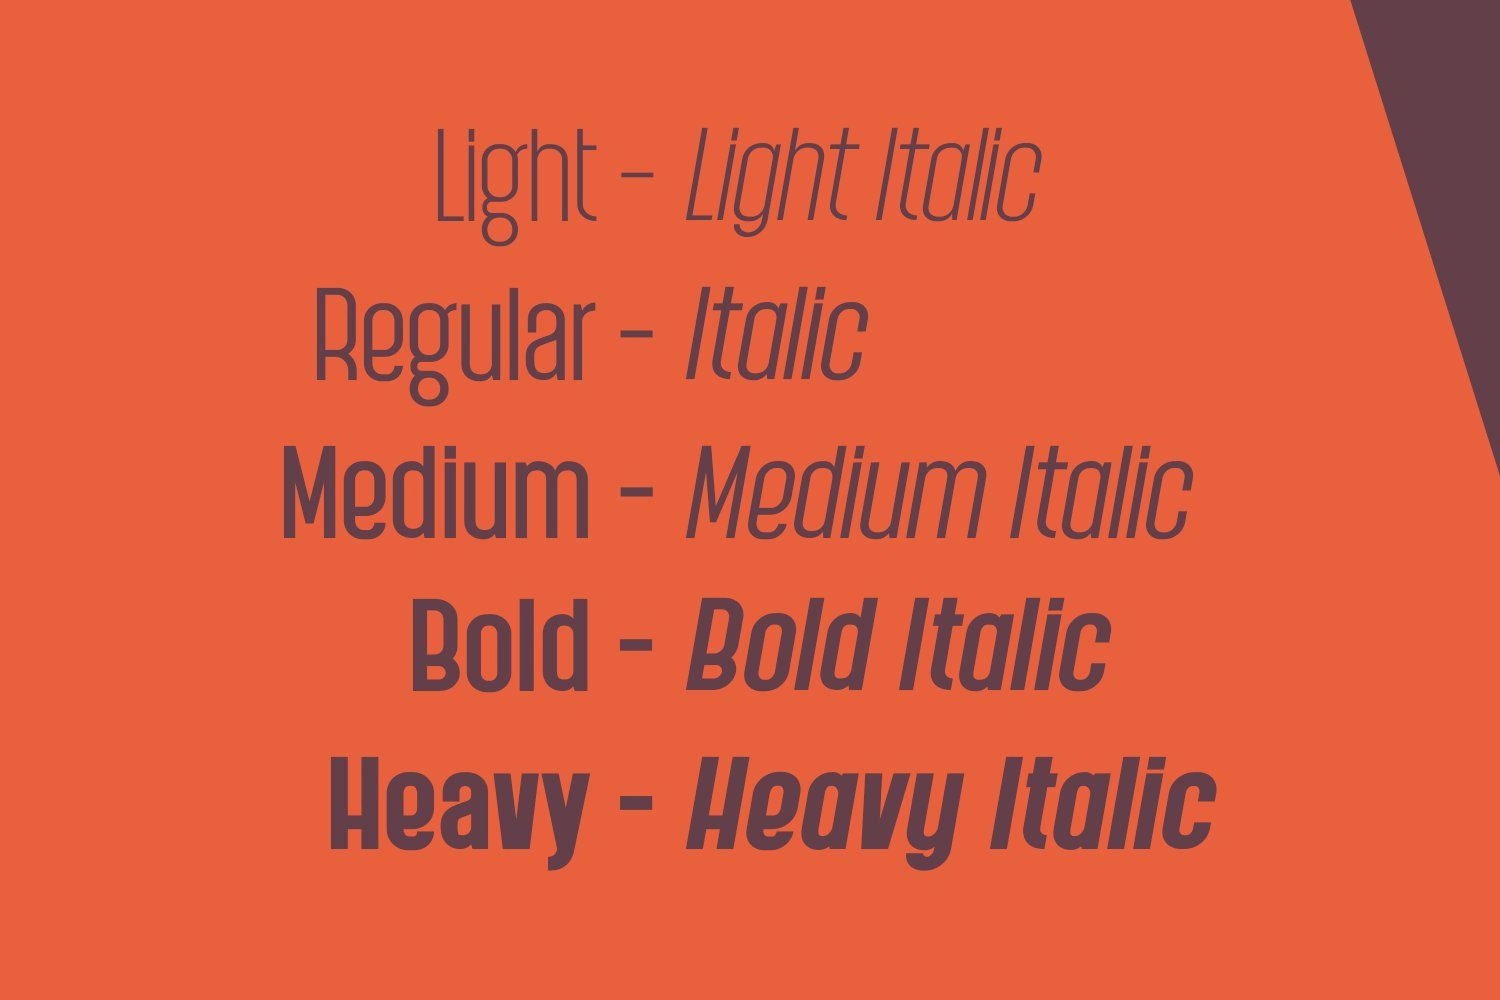 Hypop Bold Italic Font preview